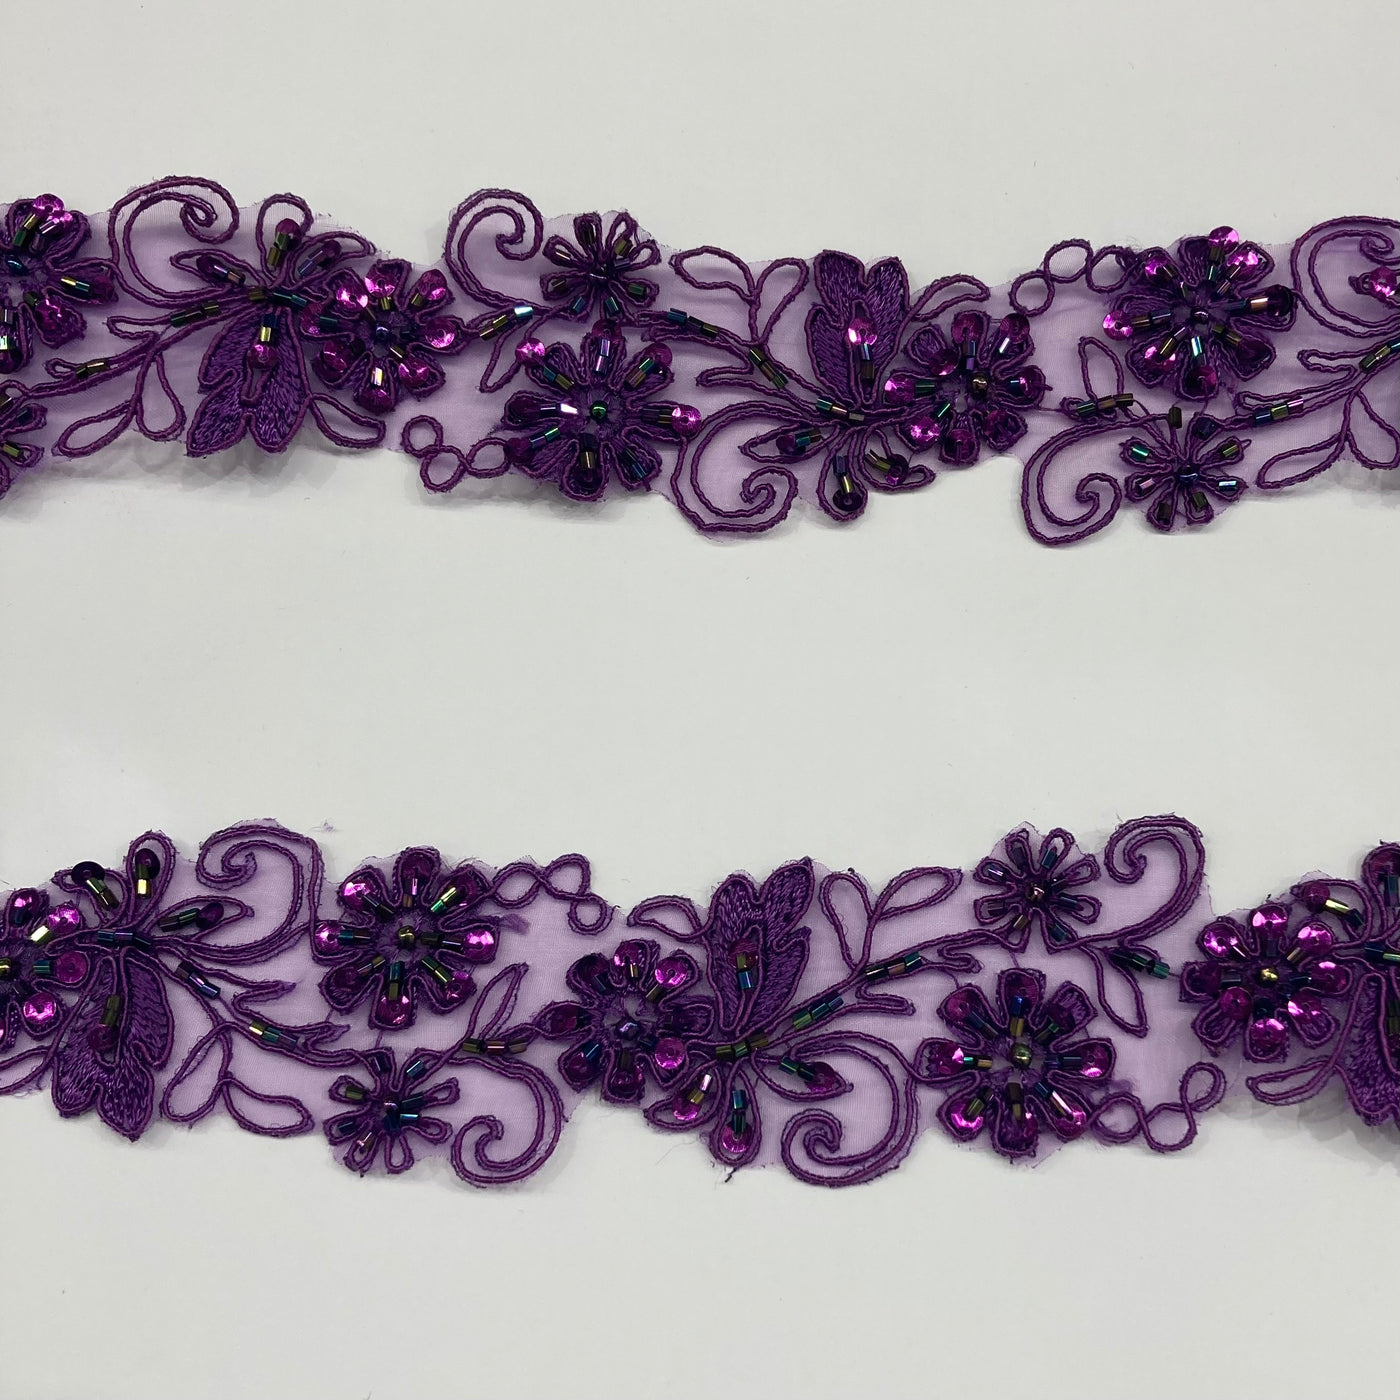 Beaded, Corded & Embroidered Purple Trimming. Lace Usa